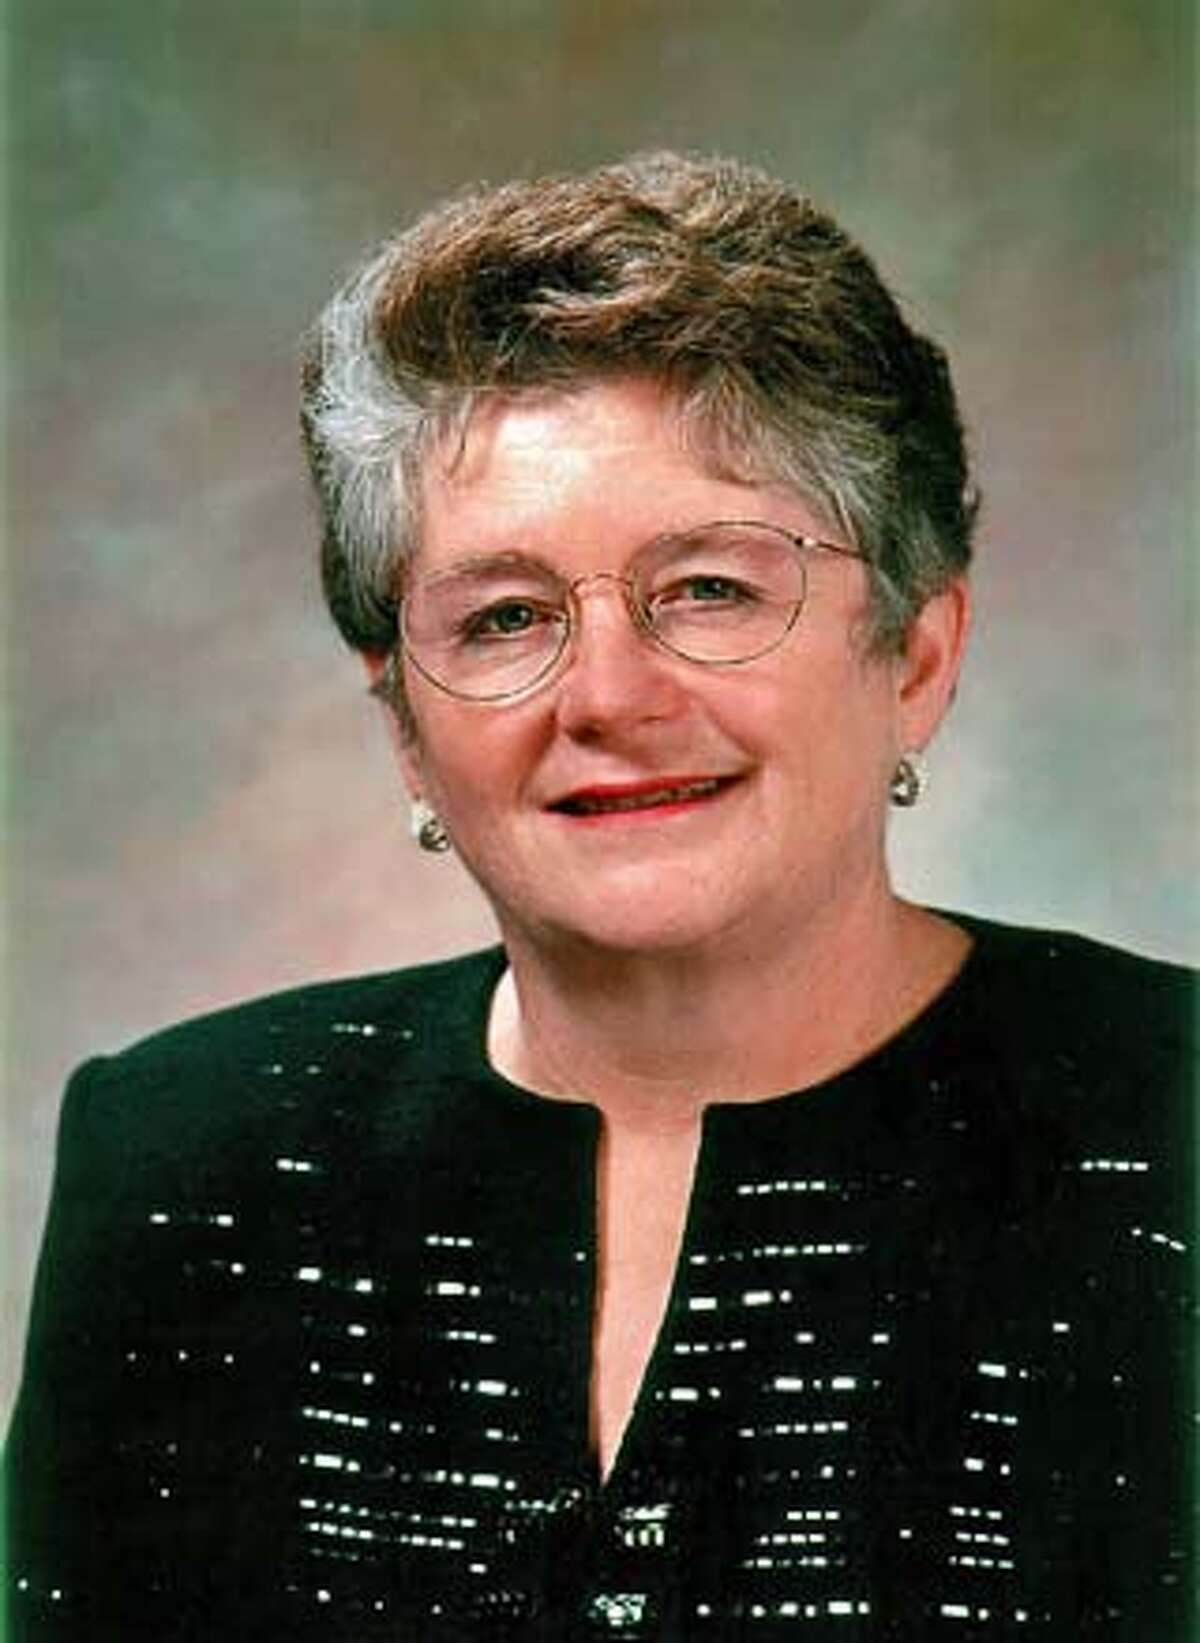 M.R.C. Greenwood is provost and senior vice president for academic affairs for the 10-campus UC system. Ran on: 11-05-2005 M.R.C. Greenwood, UC provost, is being investigated for promoting her friend, Lynda Goff.